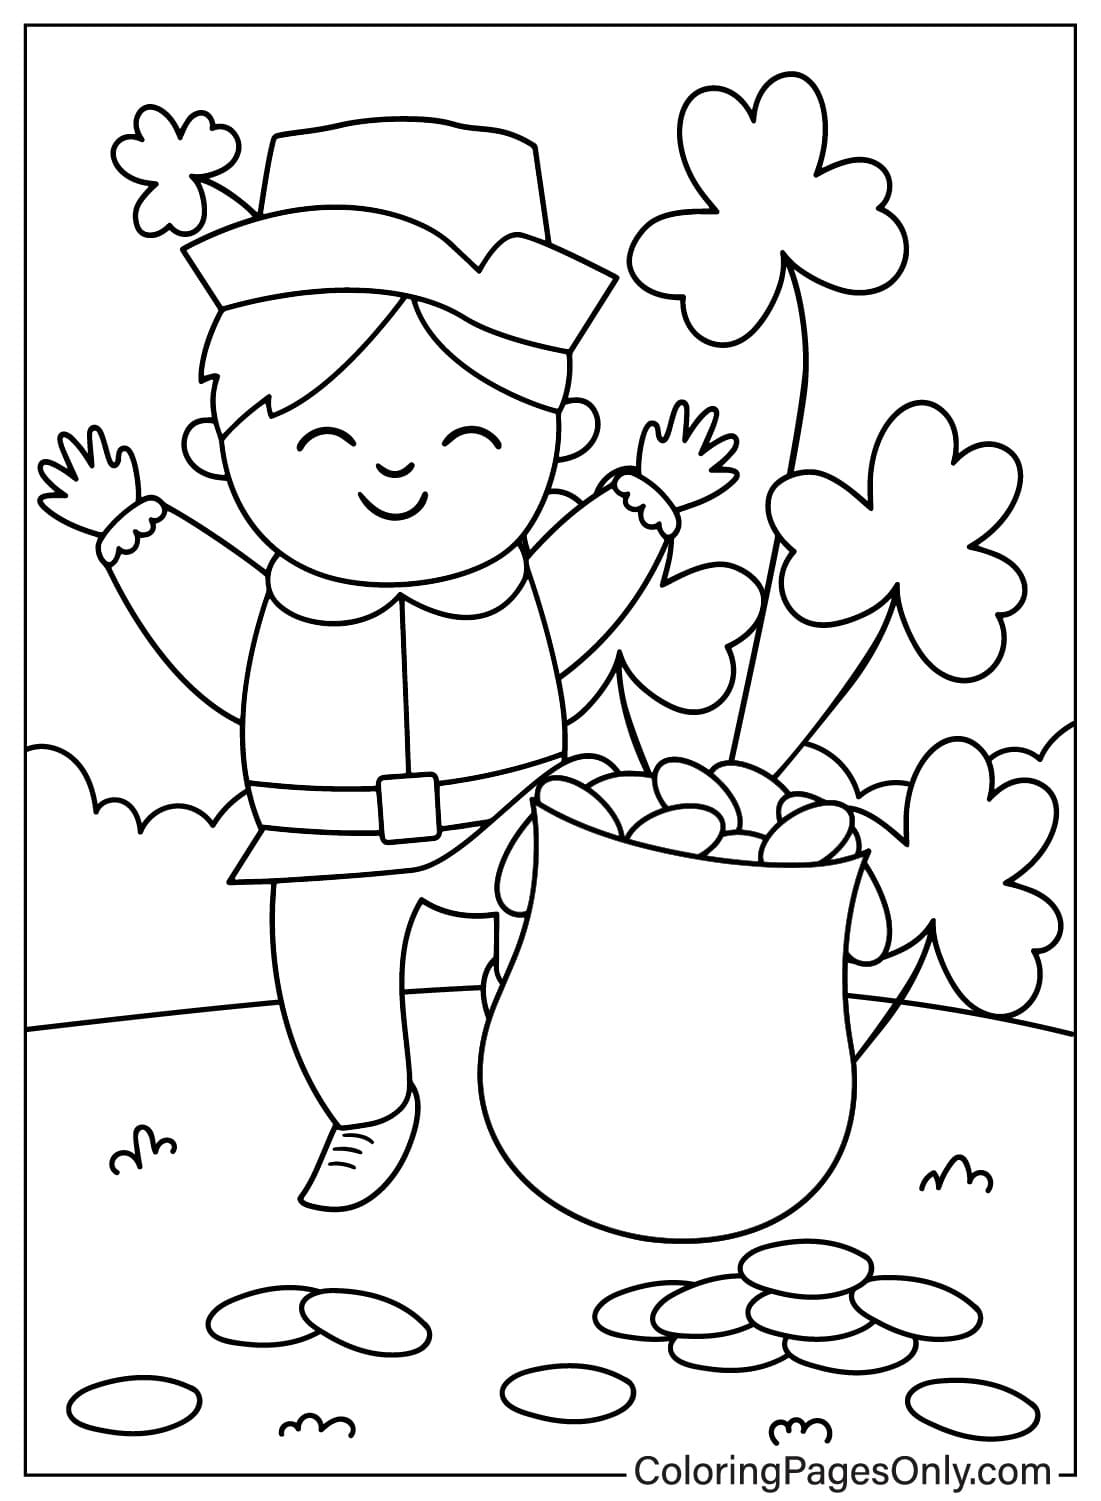 Coloring Page Lucky Charms Free Printable Coloring Pages